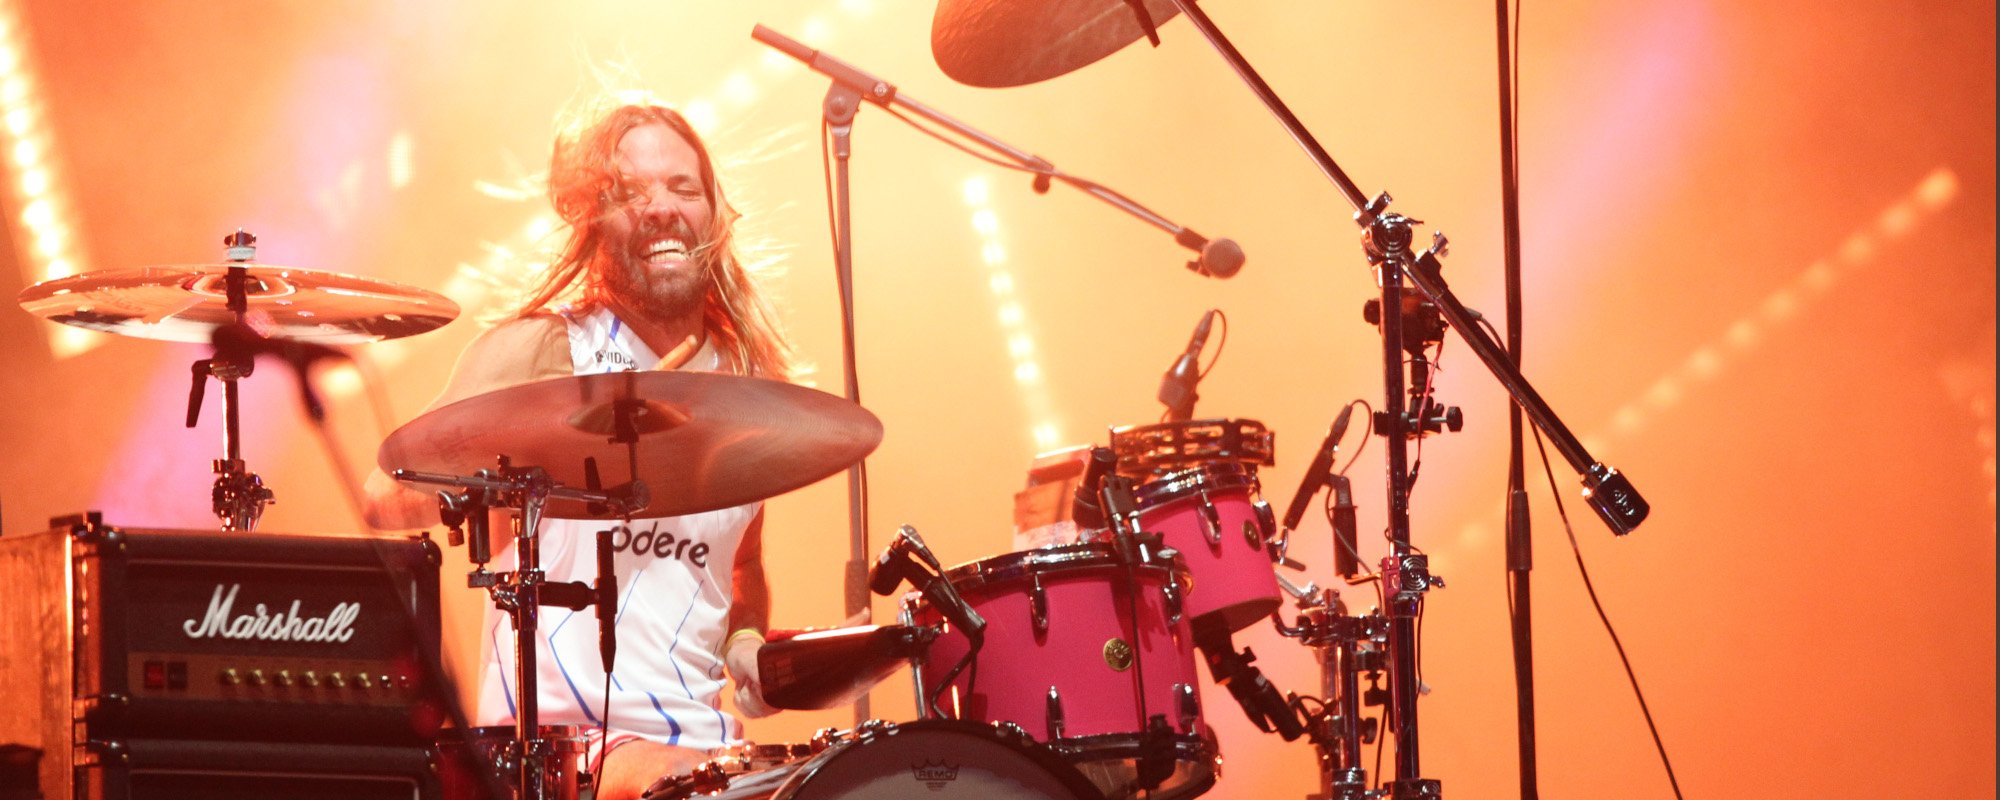 Taylor Hawkins’ Son Performs Foo Fighters’ “My Hero” in Tribute to Late Father